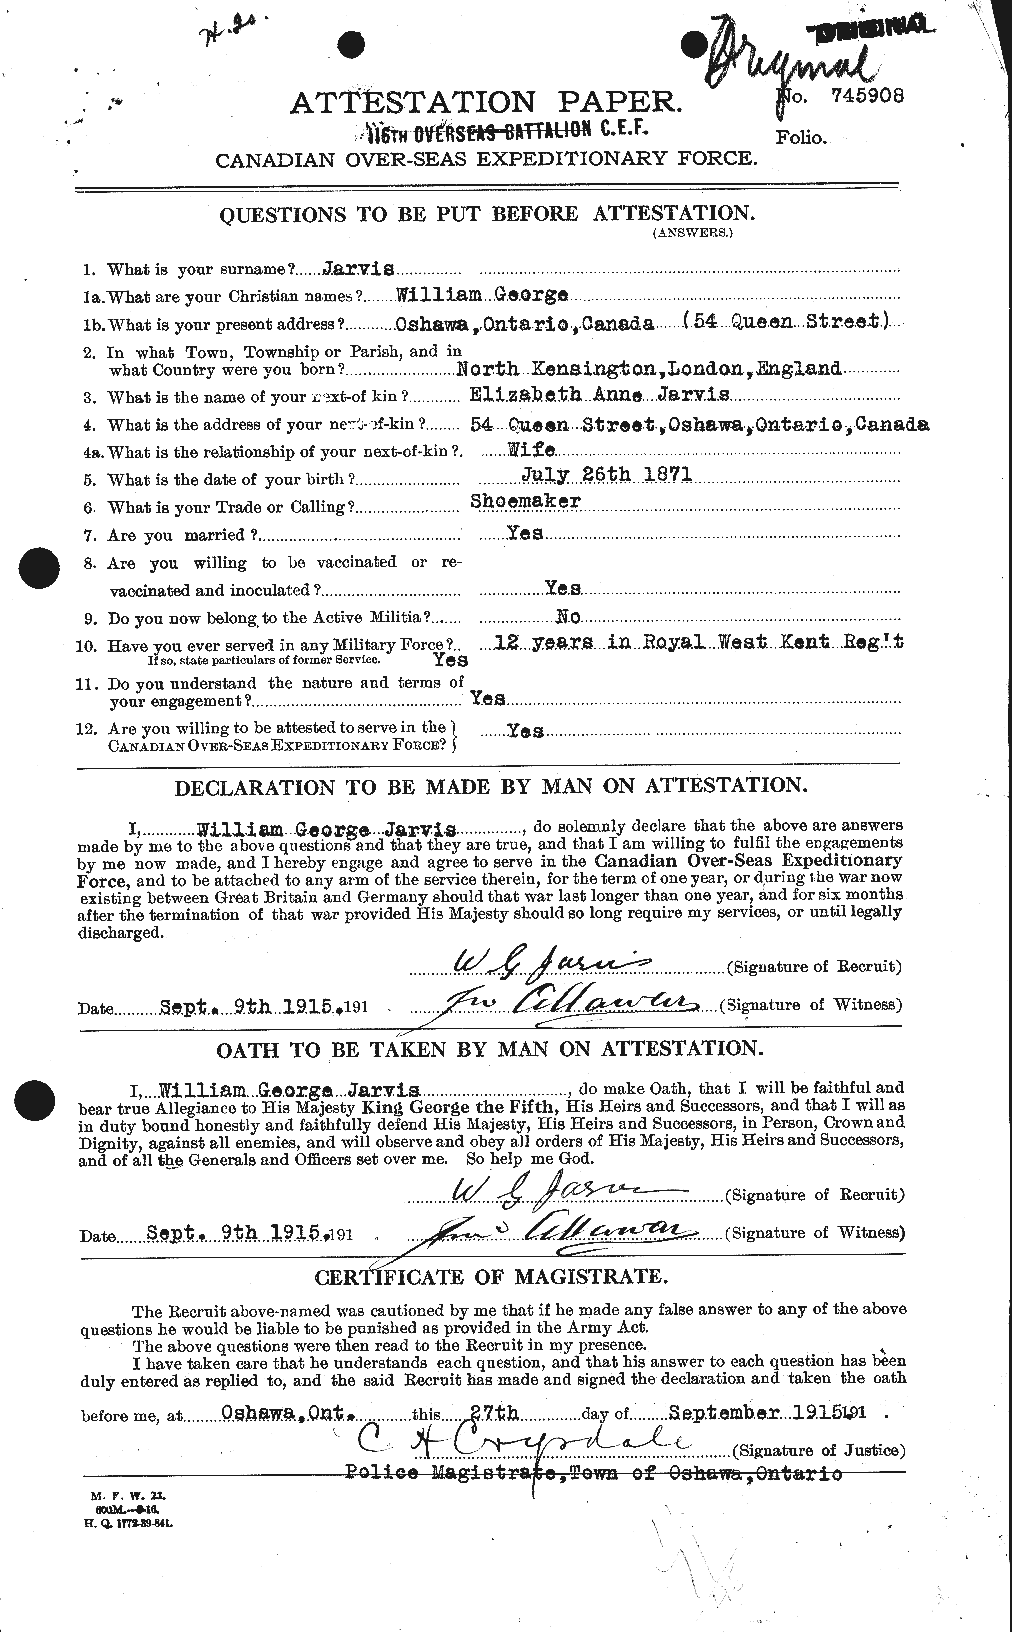 Personnel Records of the First World War - CEF 415886a